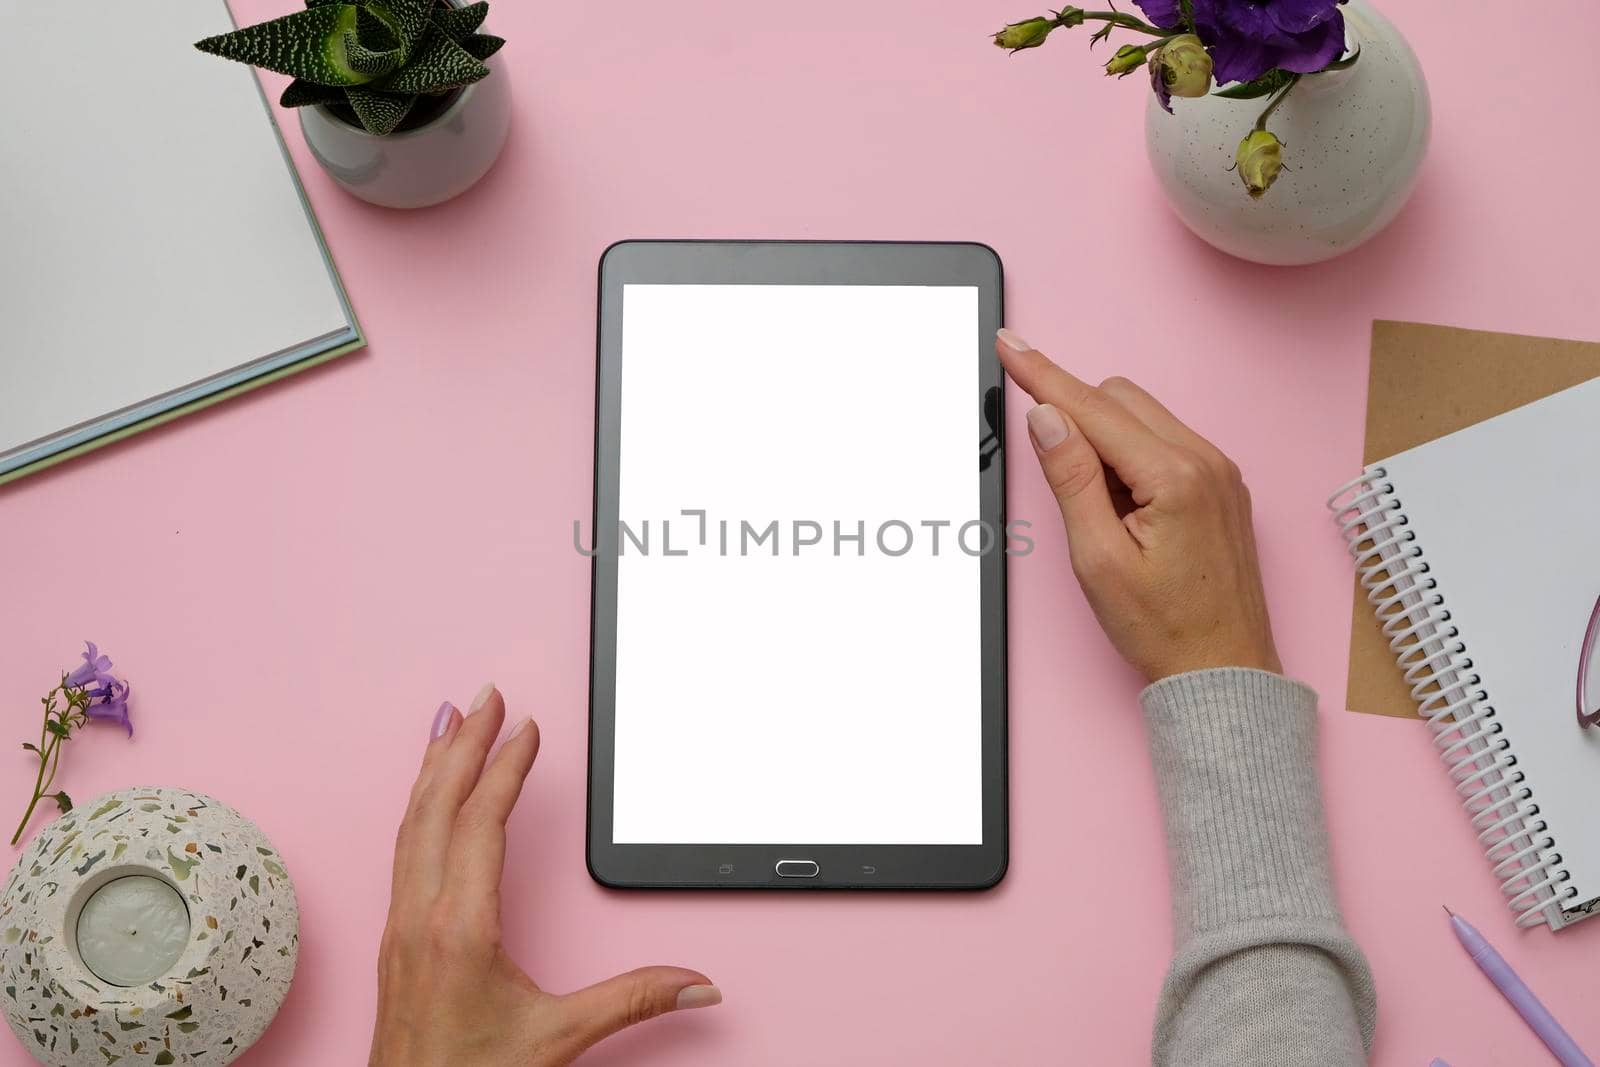 Mockup image of hands holding tablet PC on pink office desk. Flat lay.